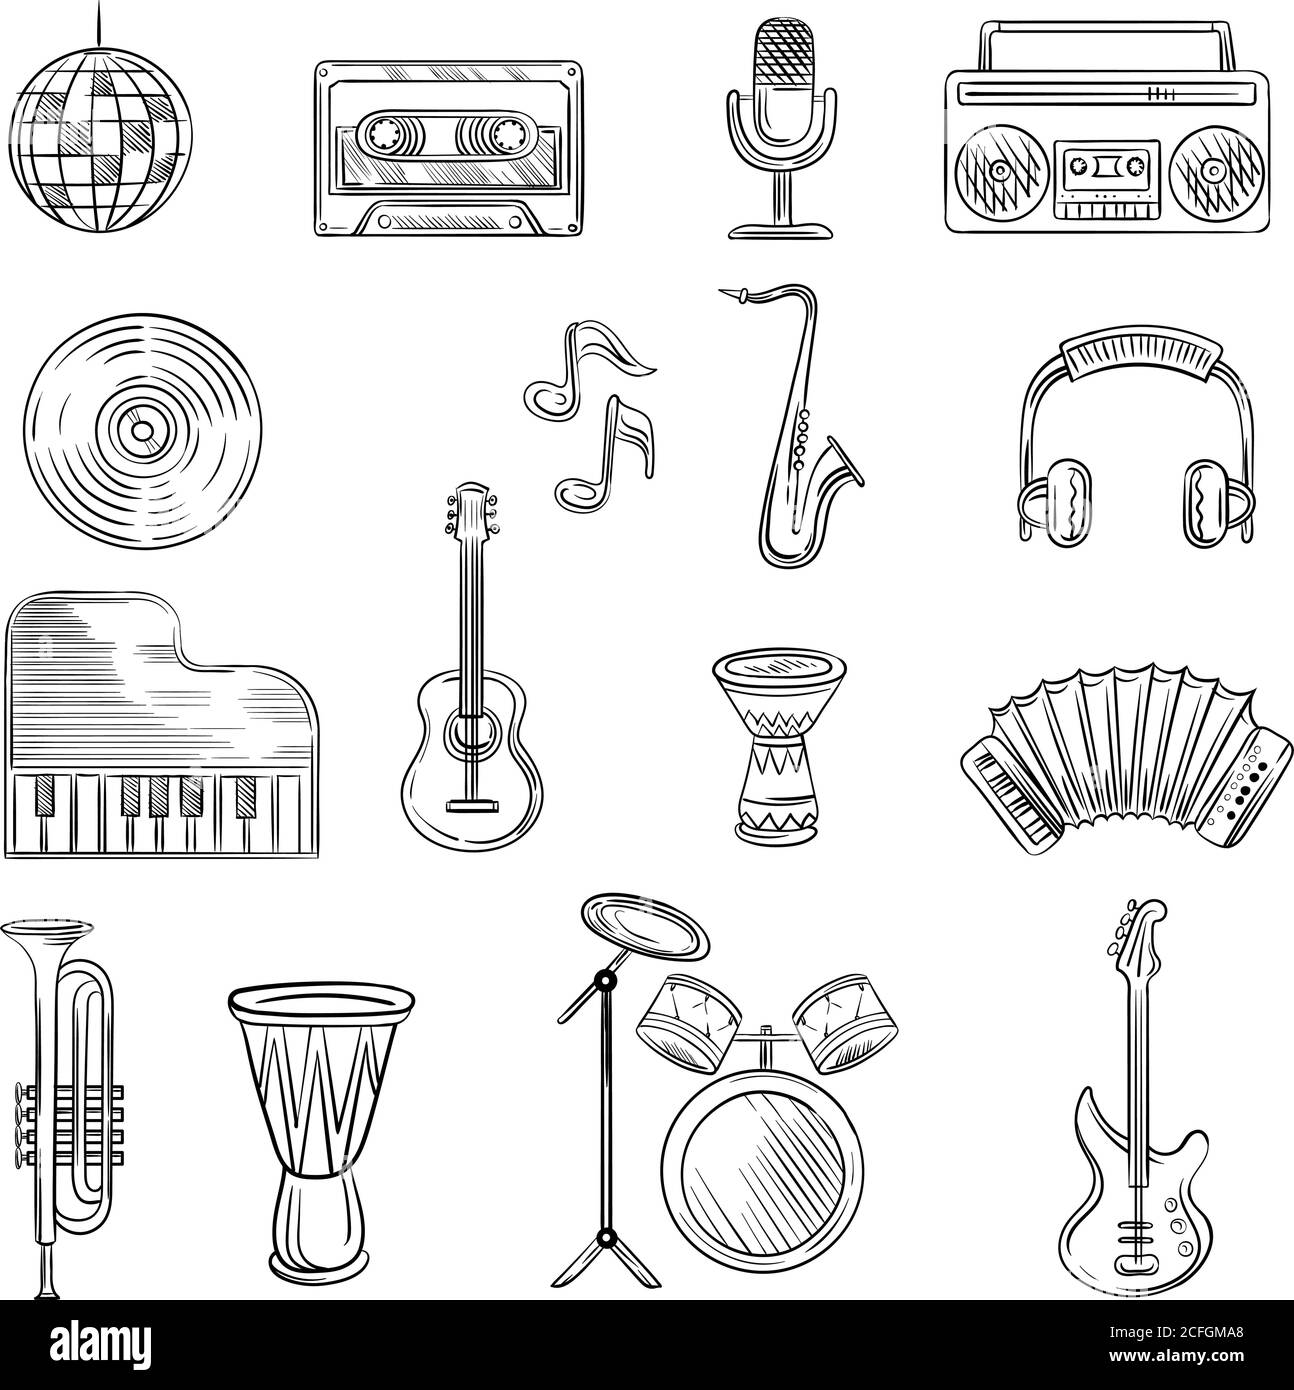 Collection of musical instruments in sketch  Stock Illustration  86742942  PIXTA